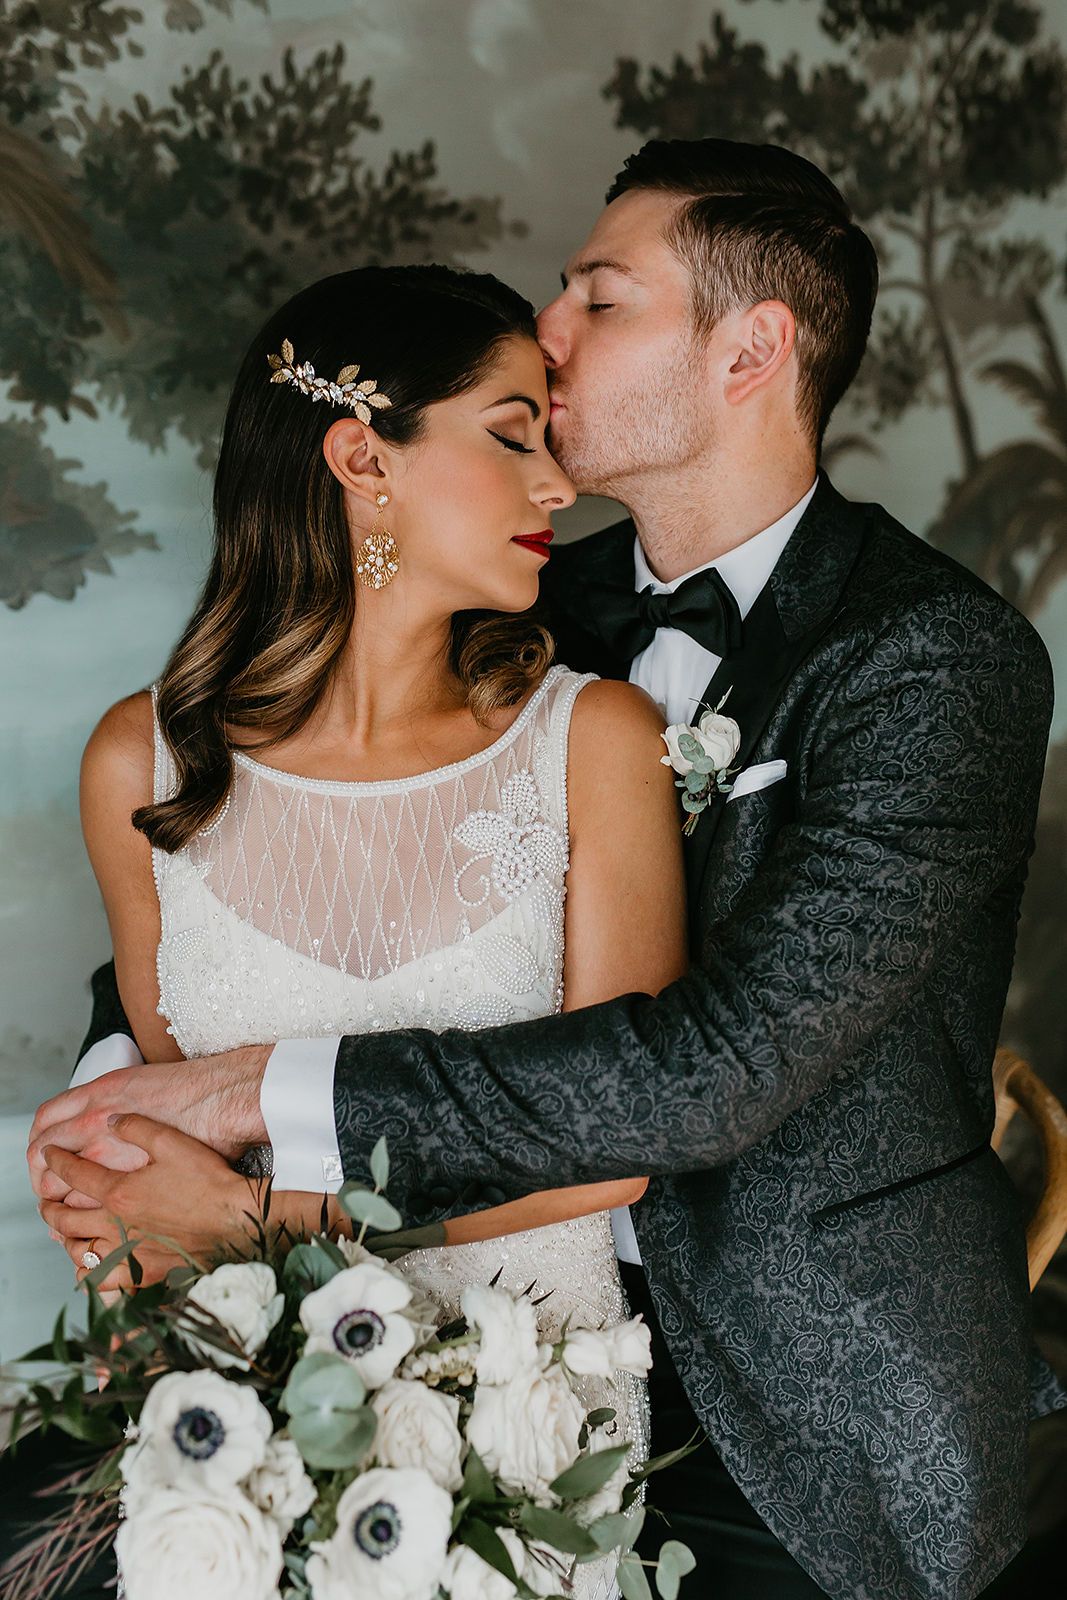 Looking Dapper: 10 Looks for the Modern Groom - on the Bronte Bride Blog, groom style, Calgary Wedding Inspiration Blog, patterned suit